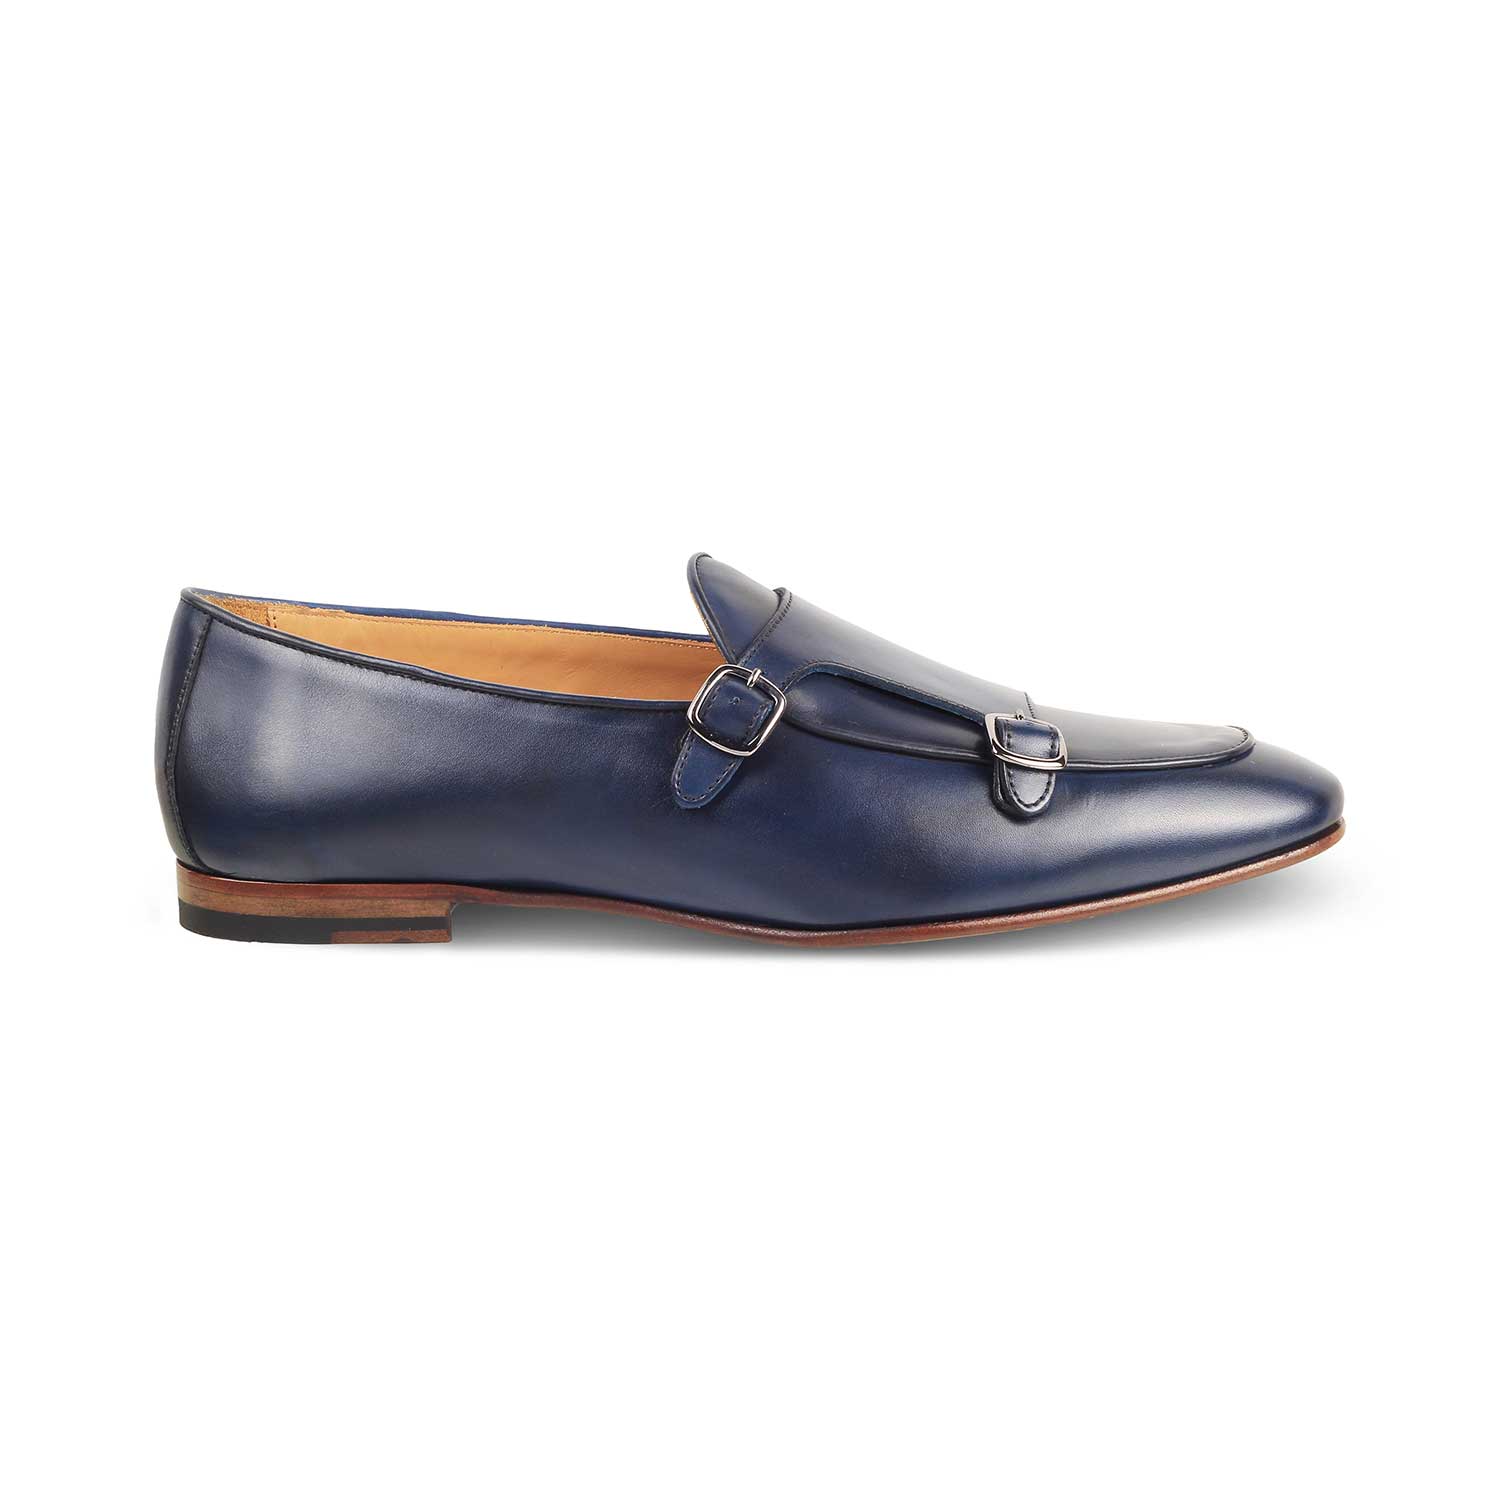 Tresmode-The Tropee Blue Men's Handcrafted Double Monk Shoes Tresmode-Tresmode